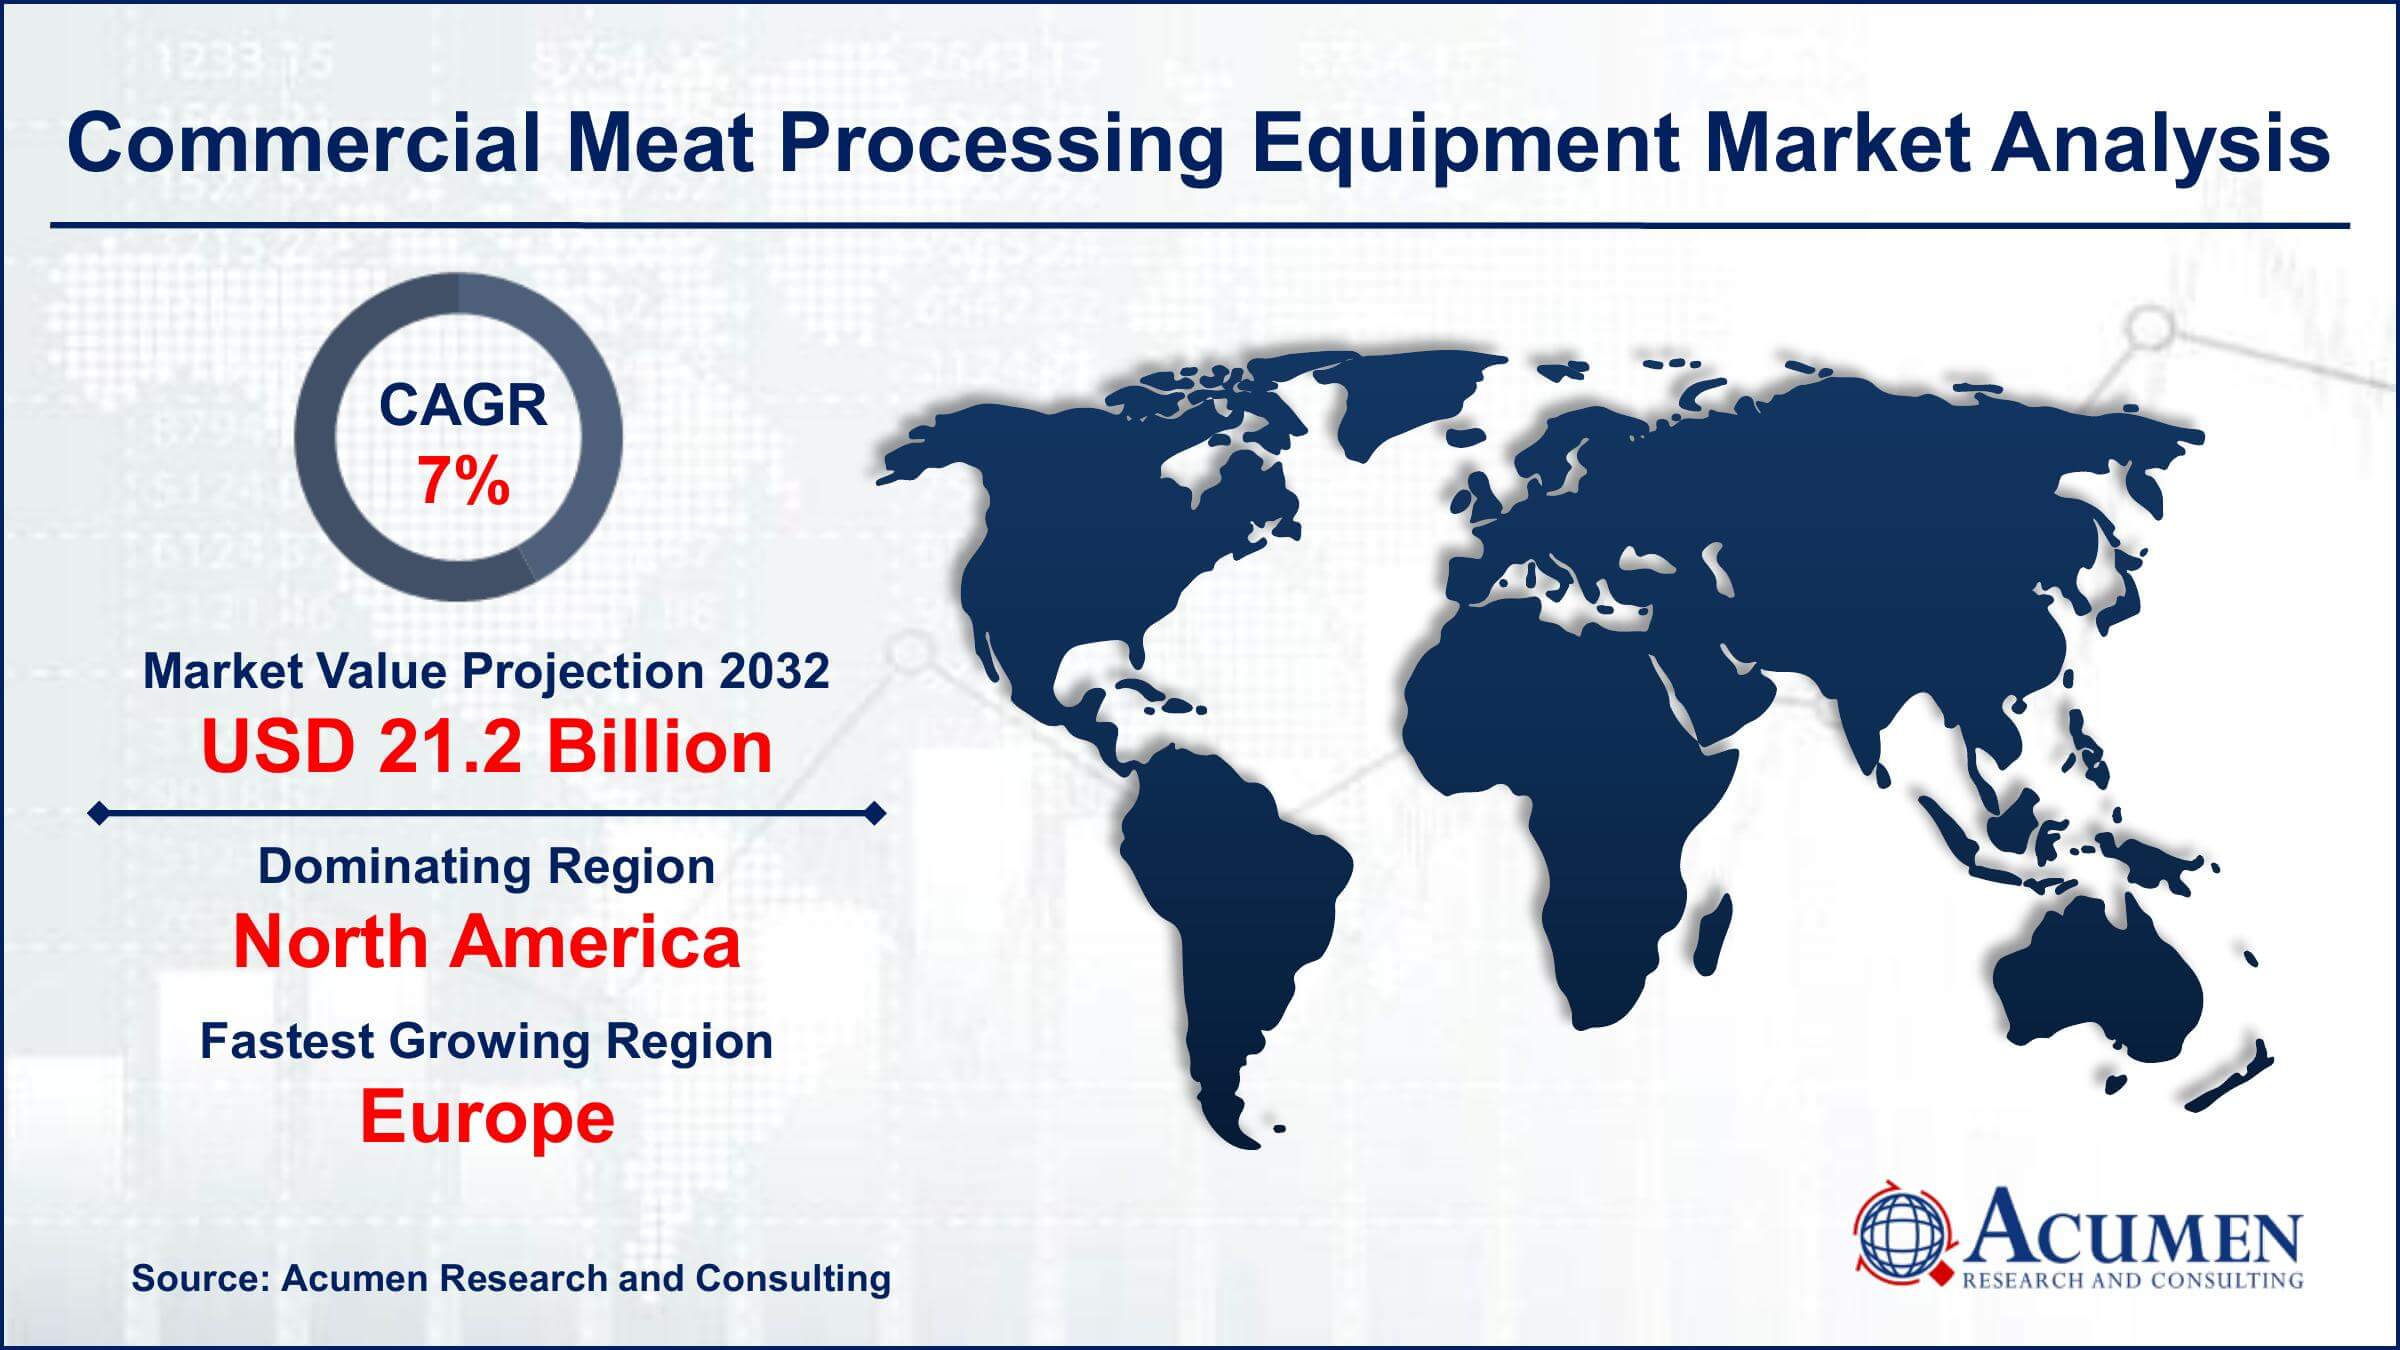 Global Commercial Meat Processing Equipment Market Trends